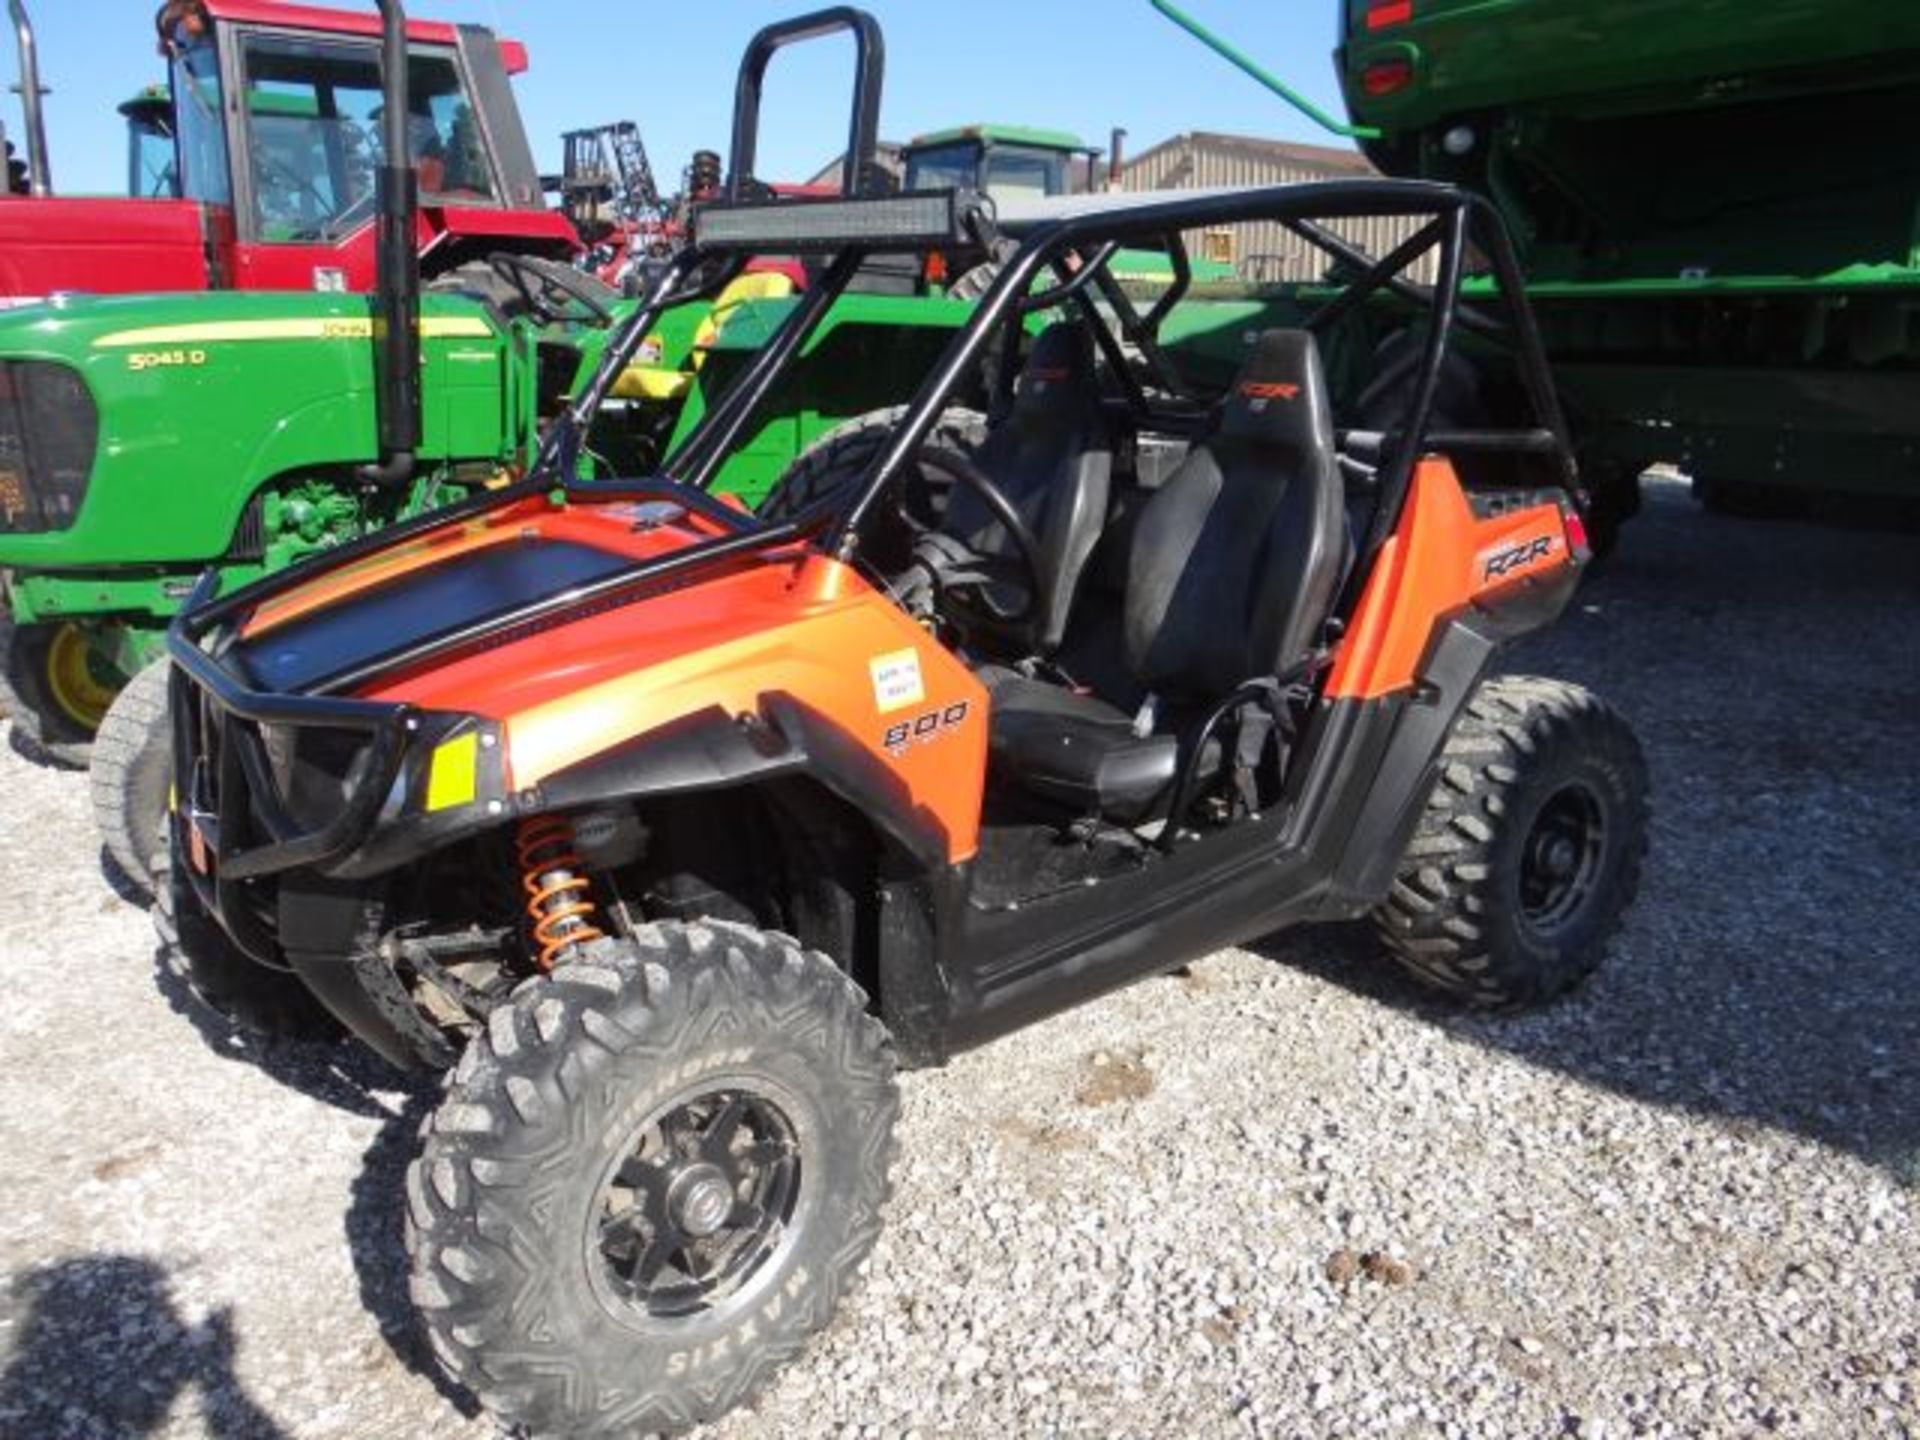 Polaris RZR 800S, 2010 After Market Cage, Roll Over Harness, LED Bar, No Title, Only Selling Because